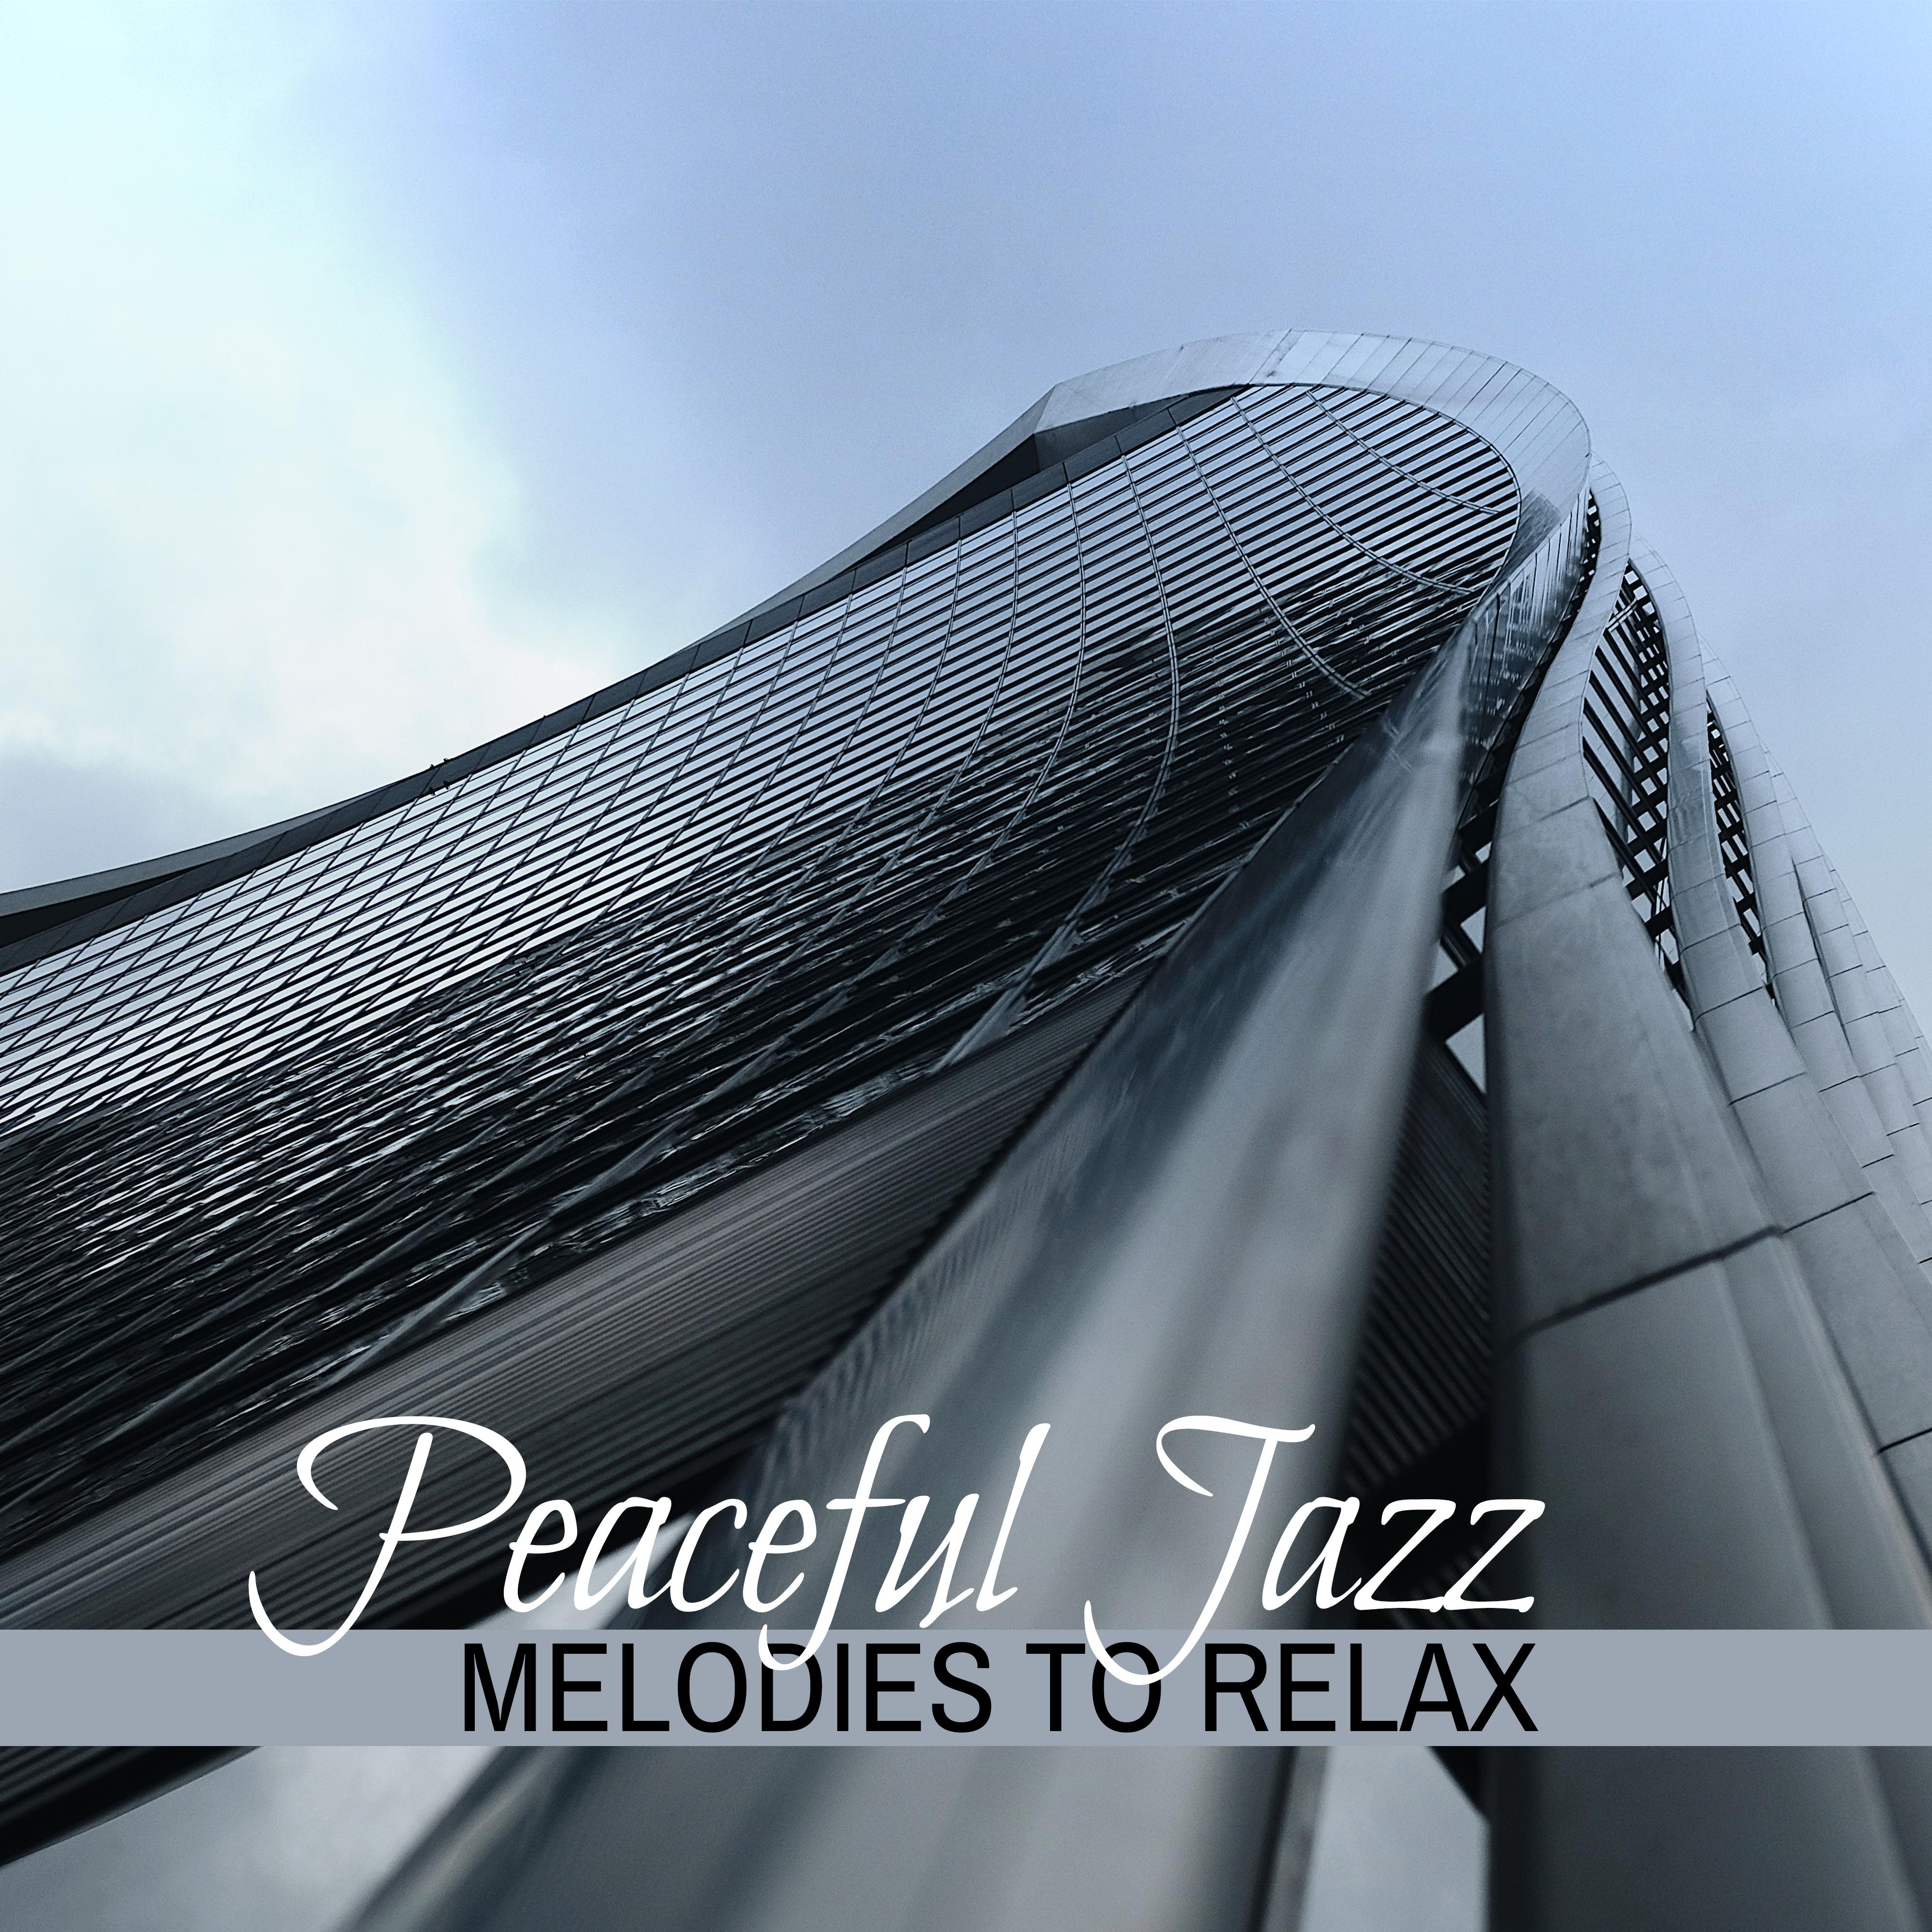 Peaceful Jazz Melodies to Relax